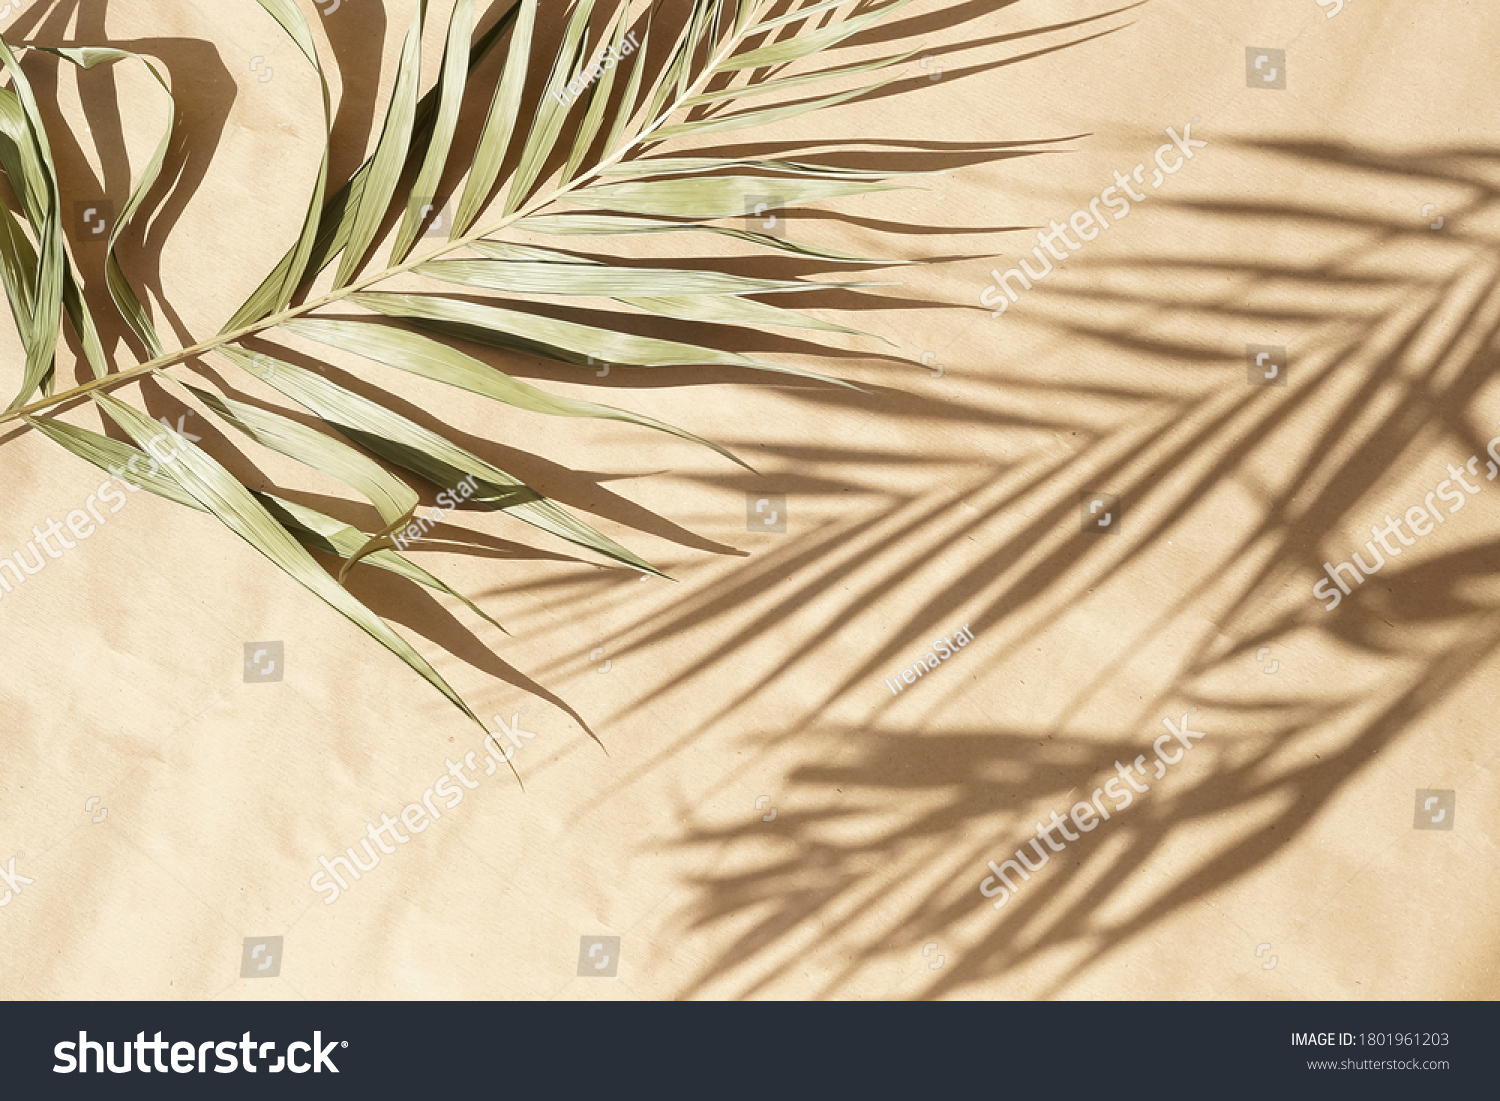 blured natural palm leaves shadow background on beige paper texture .Tropics minimalist abstract backdrop. poster #1801961203